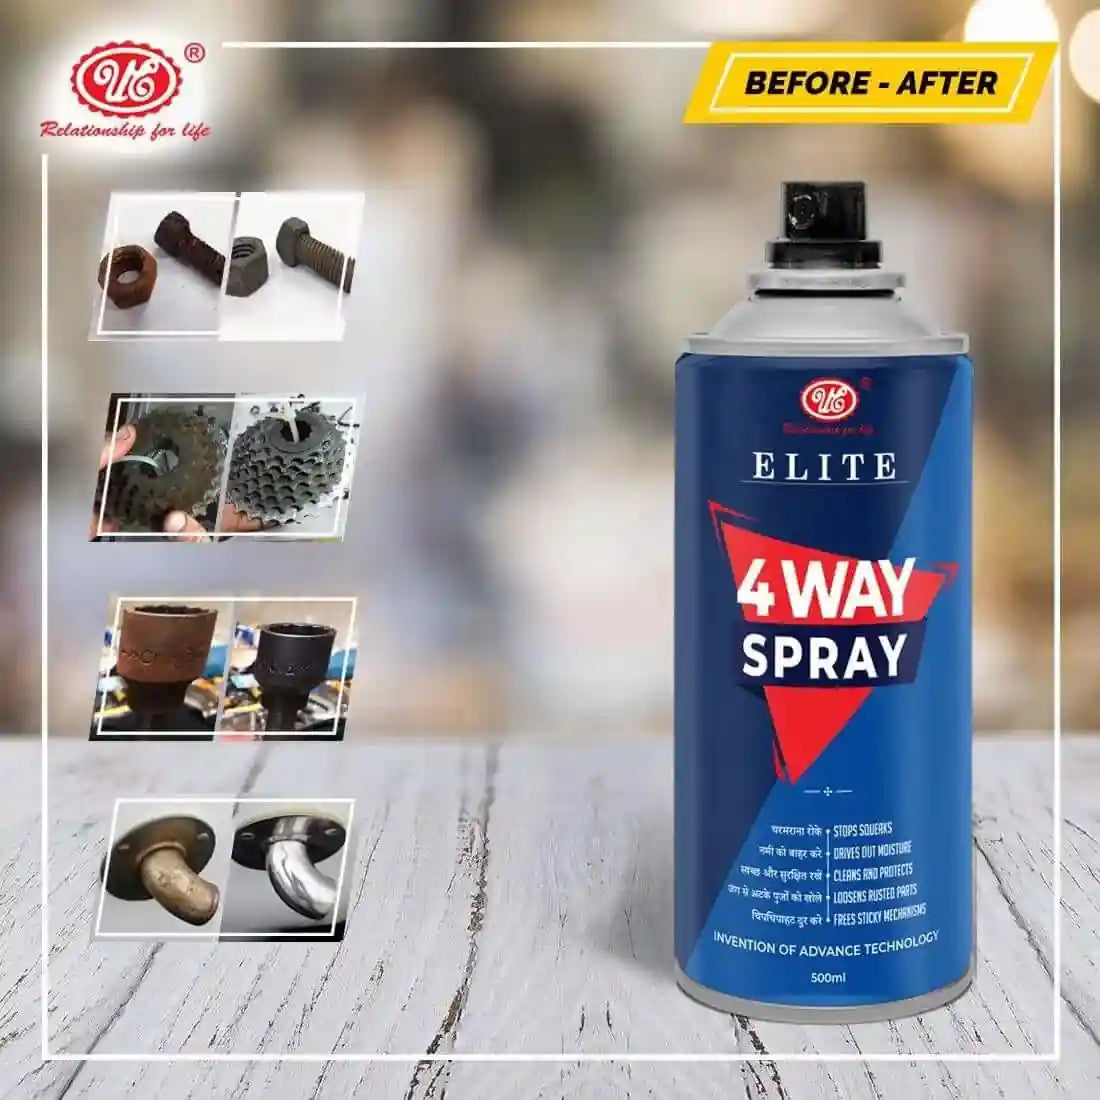 Engine Cleaner And Degreaser Spray at Best Price in Mumbai